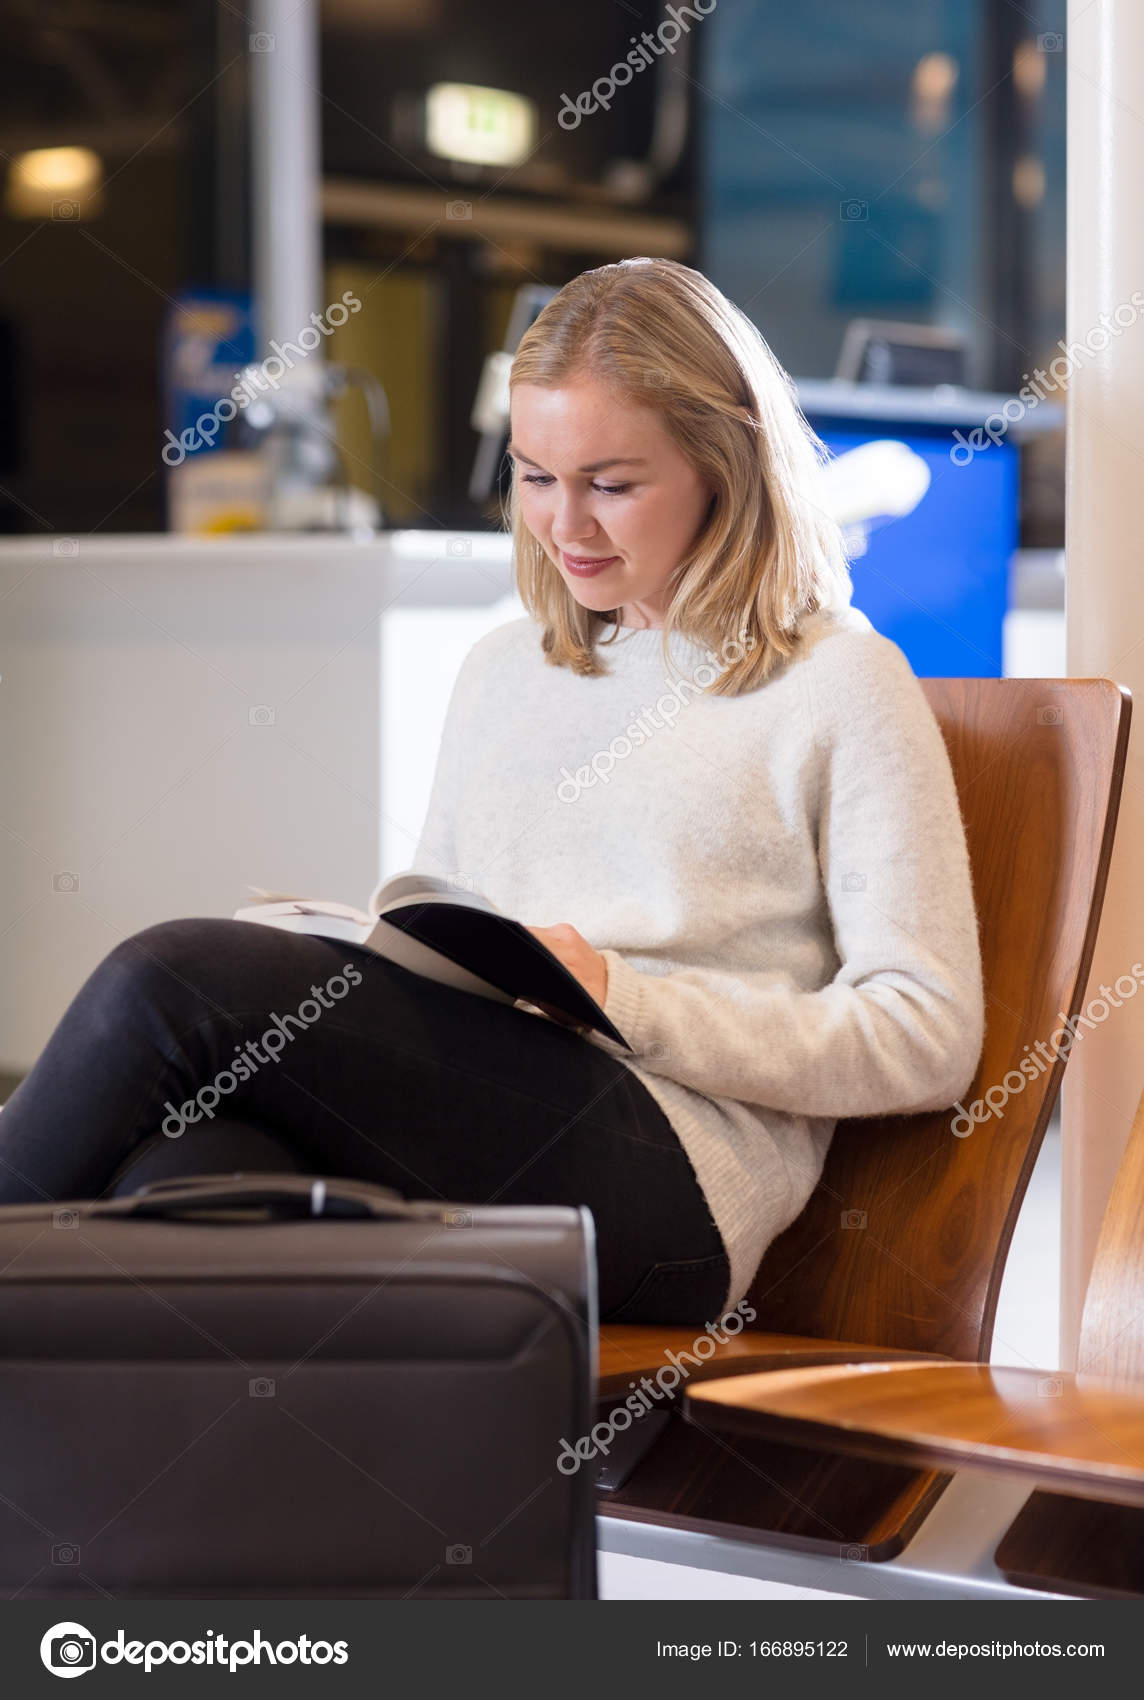 Woman Reading Book In Airport Waiting Area — Stock Photo ...